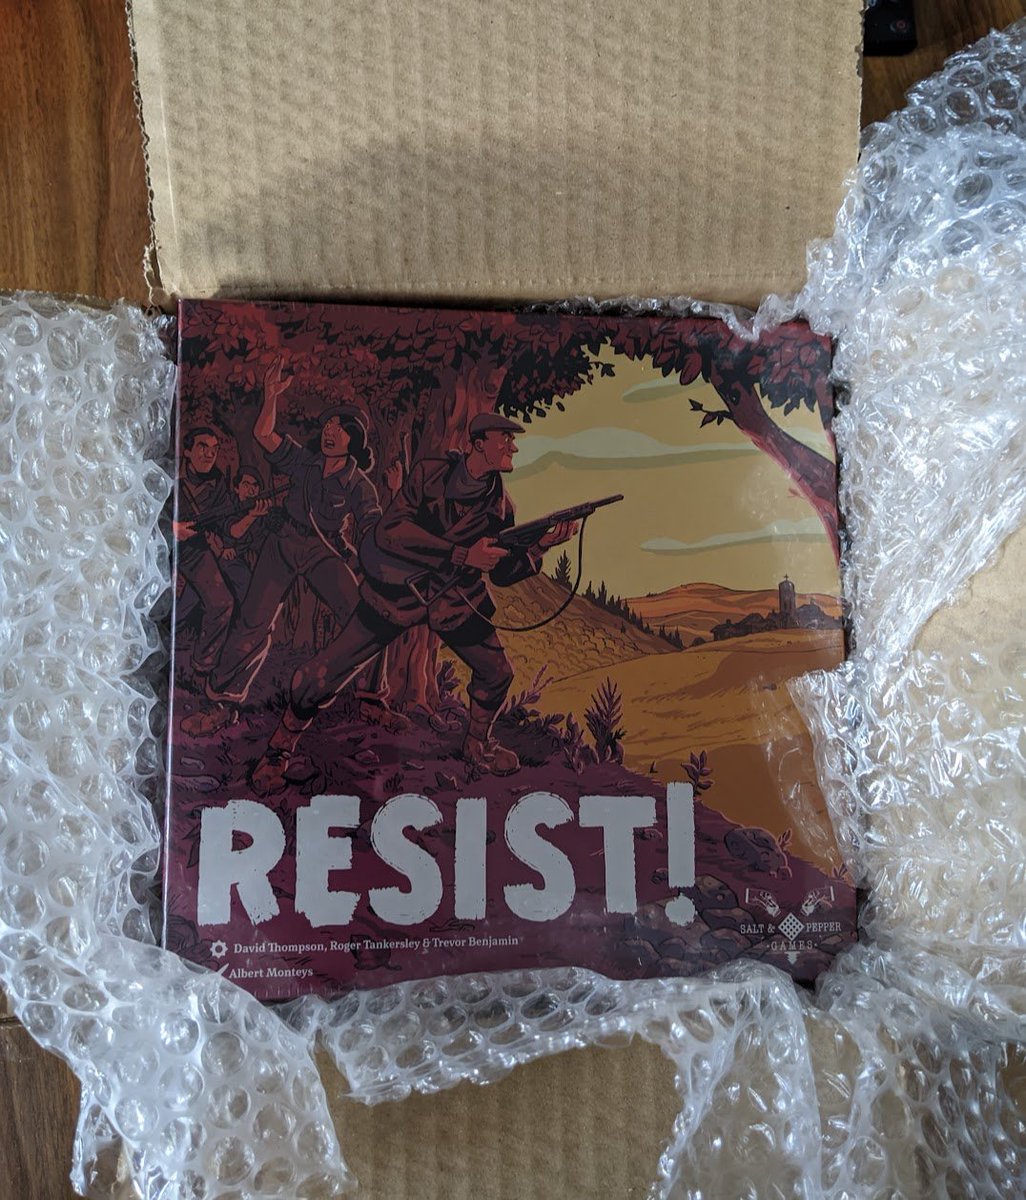 After a delivery issue, I just received Resist! @SaltPeppergames Thank you for your excellent support!